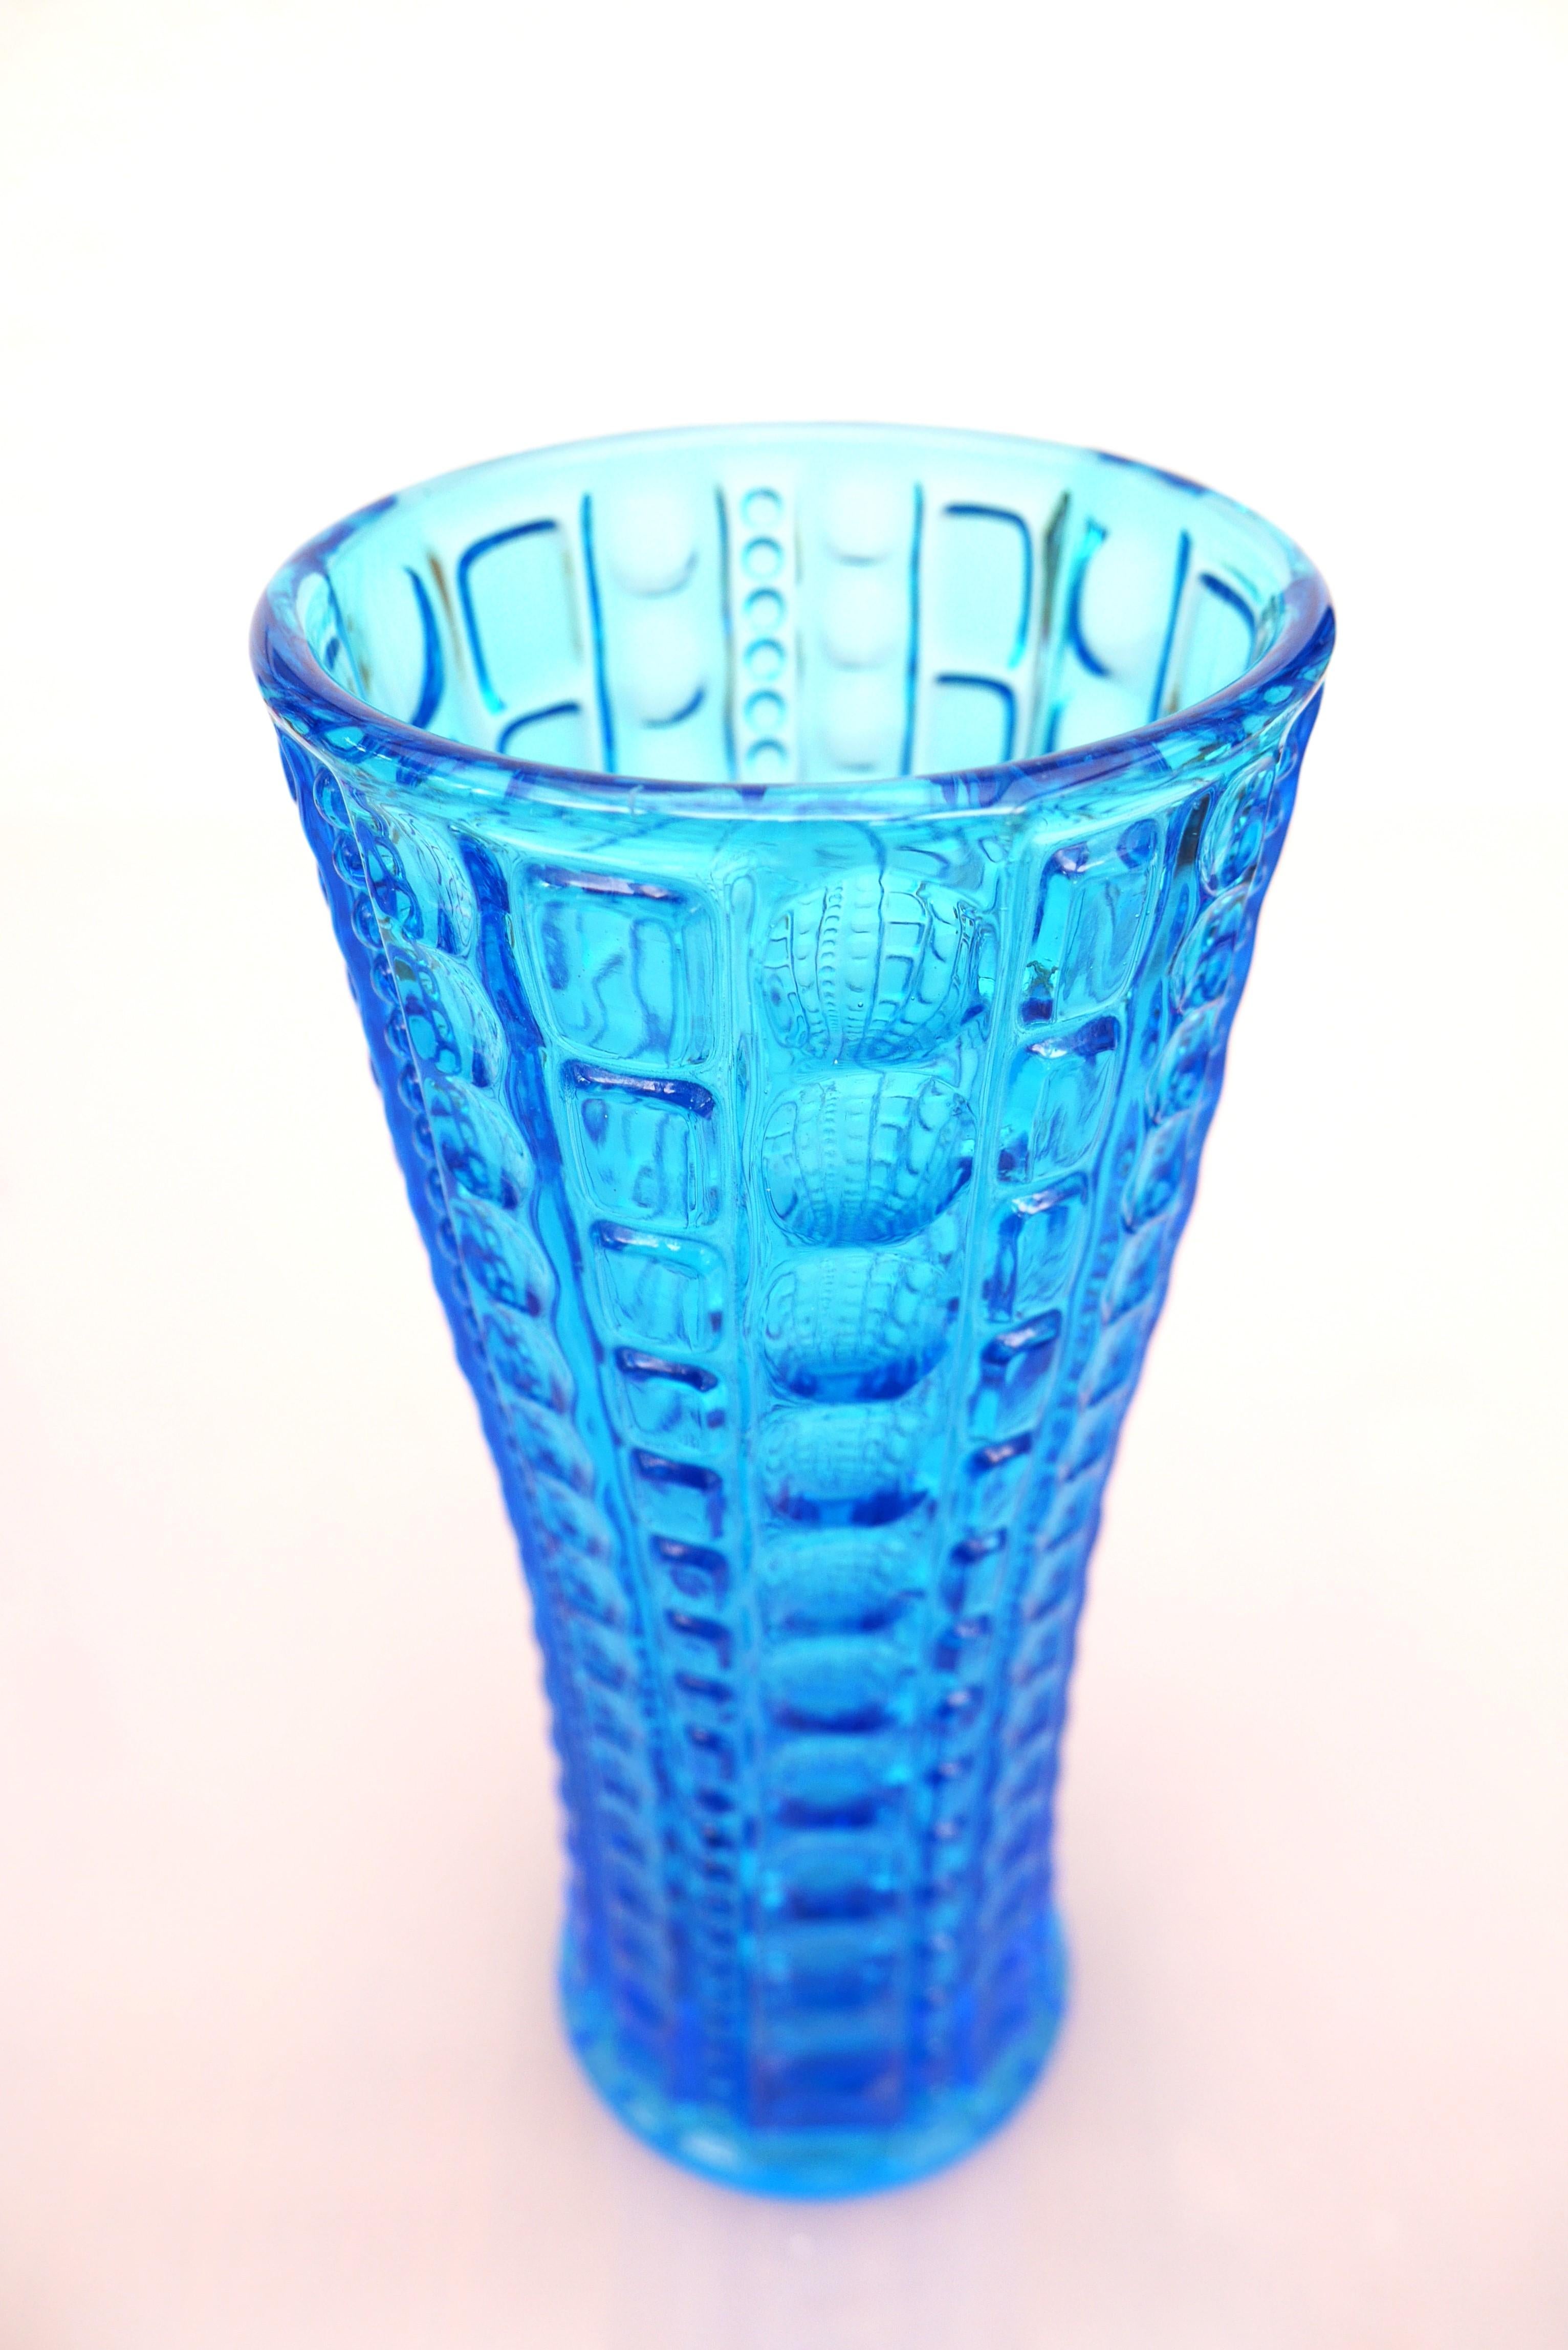 An amazing vibrant blue vintage glass vase, made by Jan Sylwester Drost, Ząbkowice glass factory in Poland, the vase name is Pearl  and made in the 70s. The shape is fantastic with numerous smaller units, which together makes unique vase.

The vase